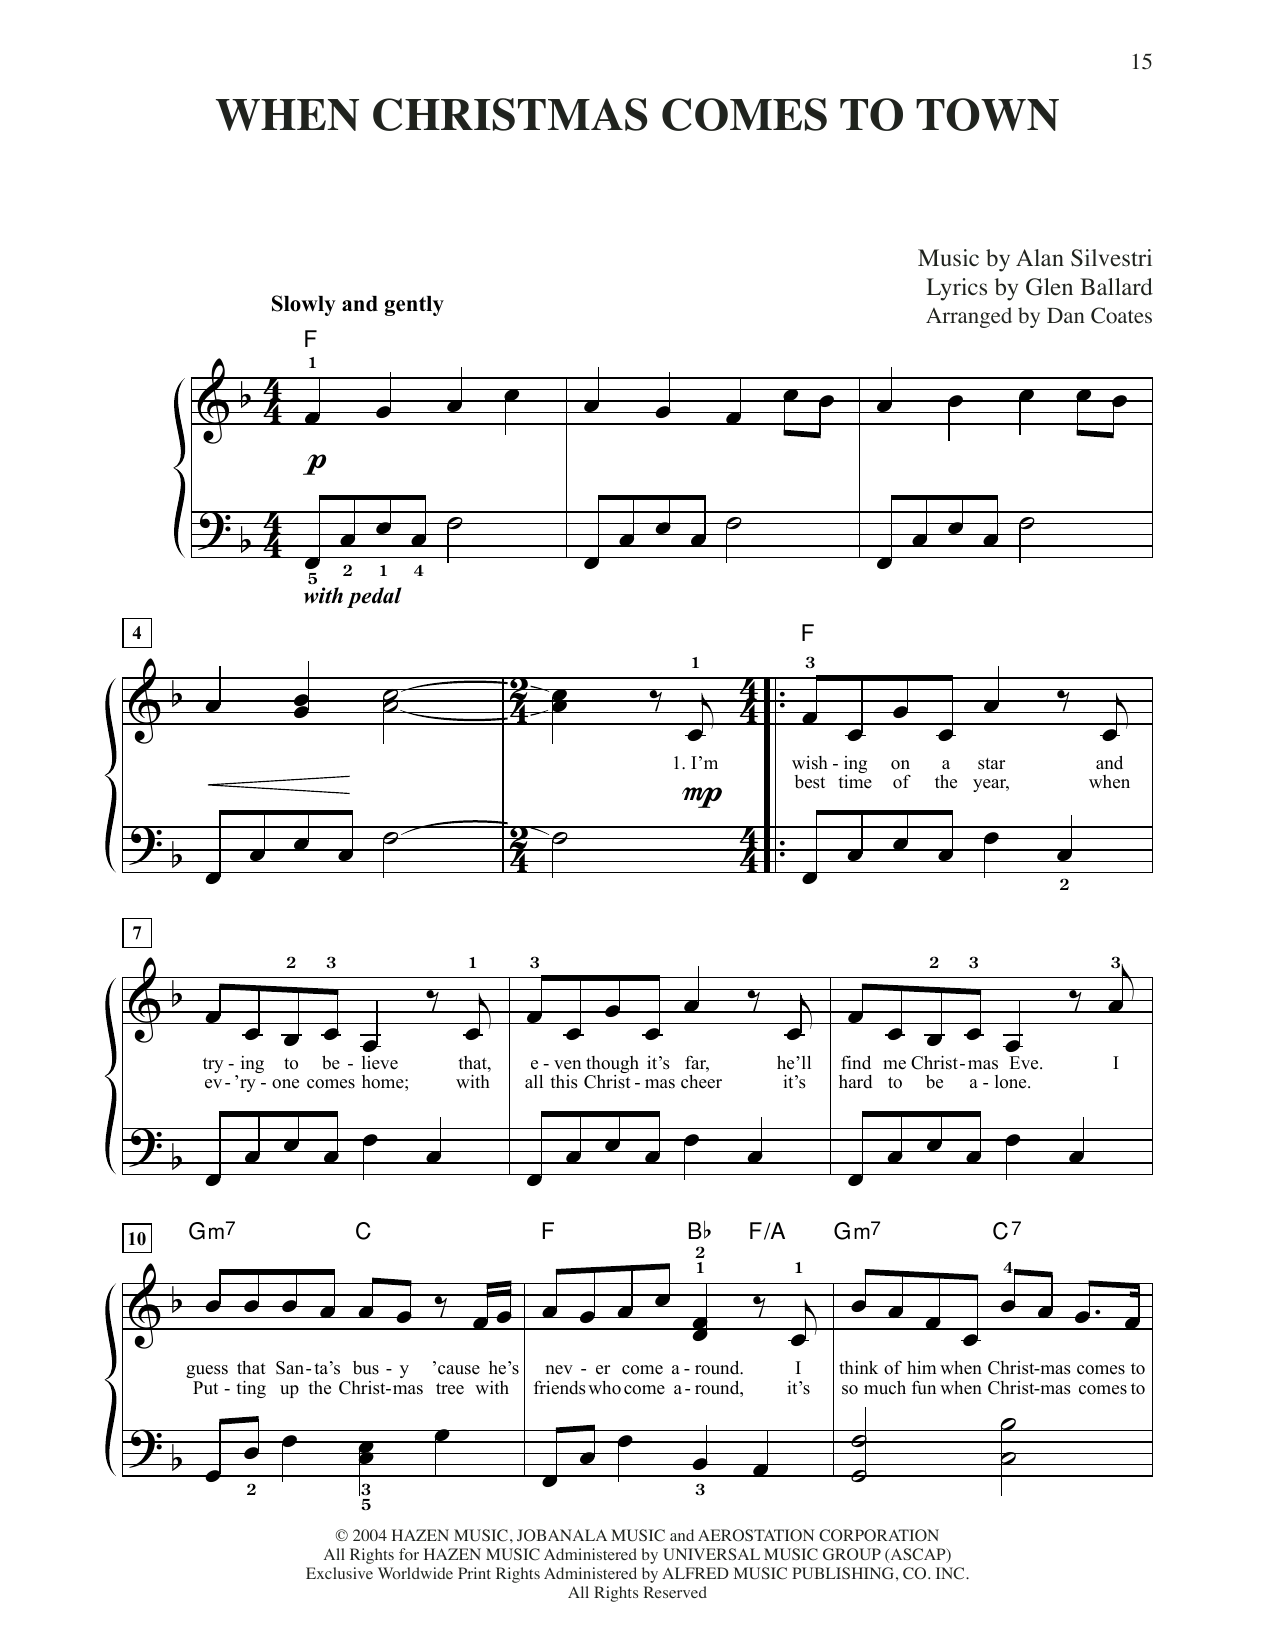 Download Glen Ballard and Alan Silvestri When Christmas Comes To Town (from The Sheet Music